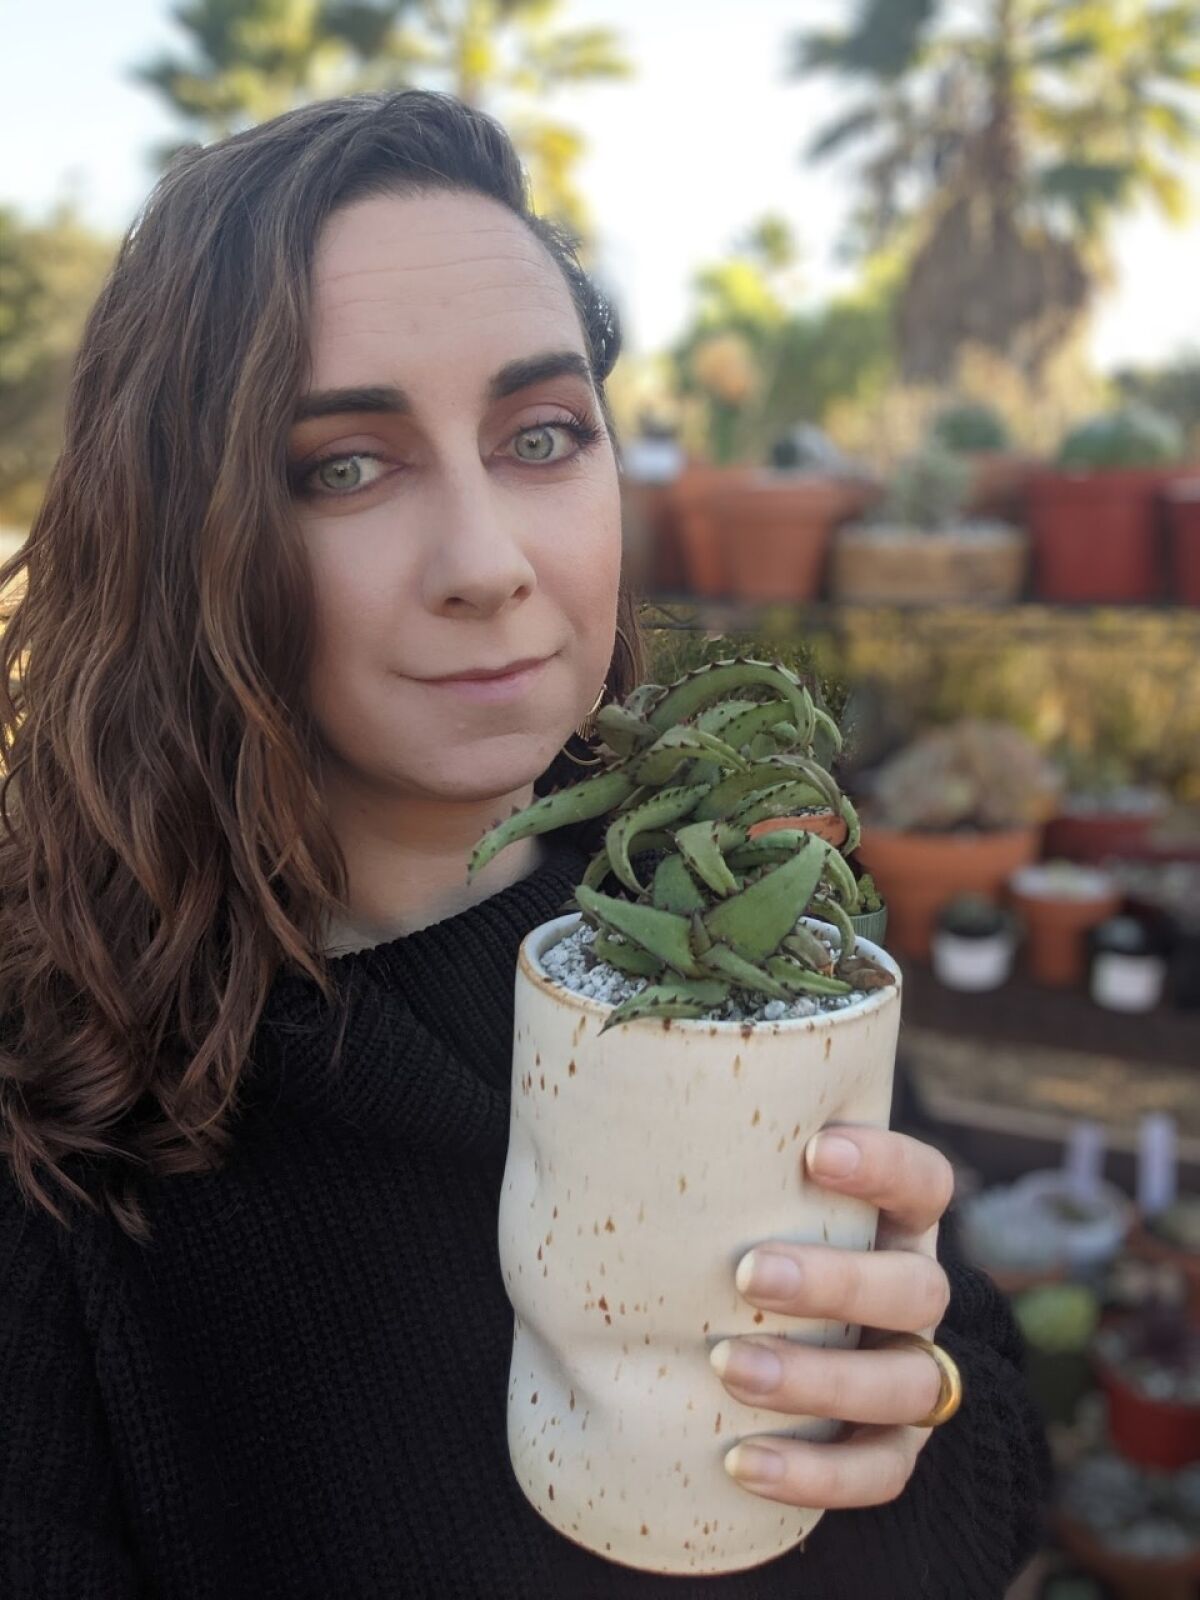 The La Jolla Community Center will present “Growing Cacti and Succulents 101” with Jennifer Greene on Wednesday, July 13.